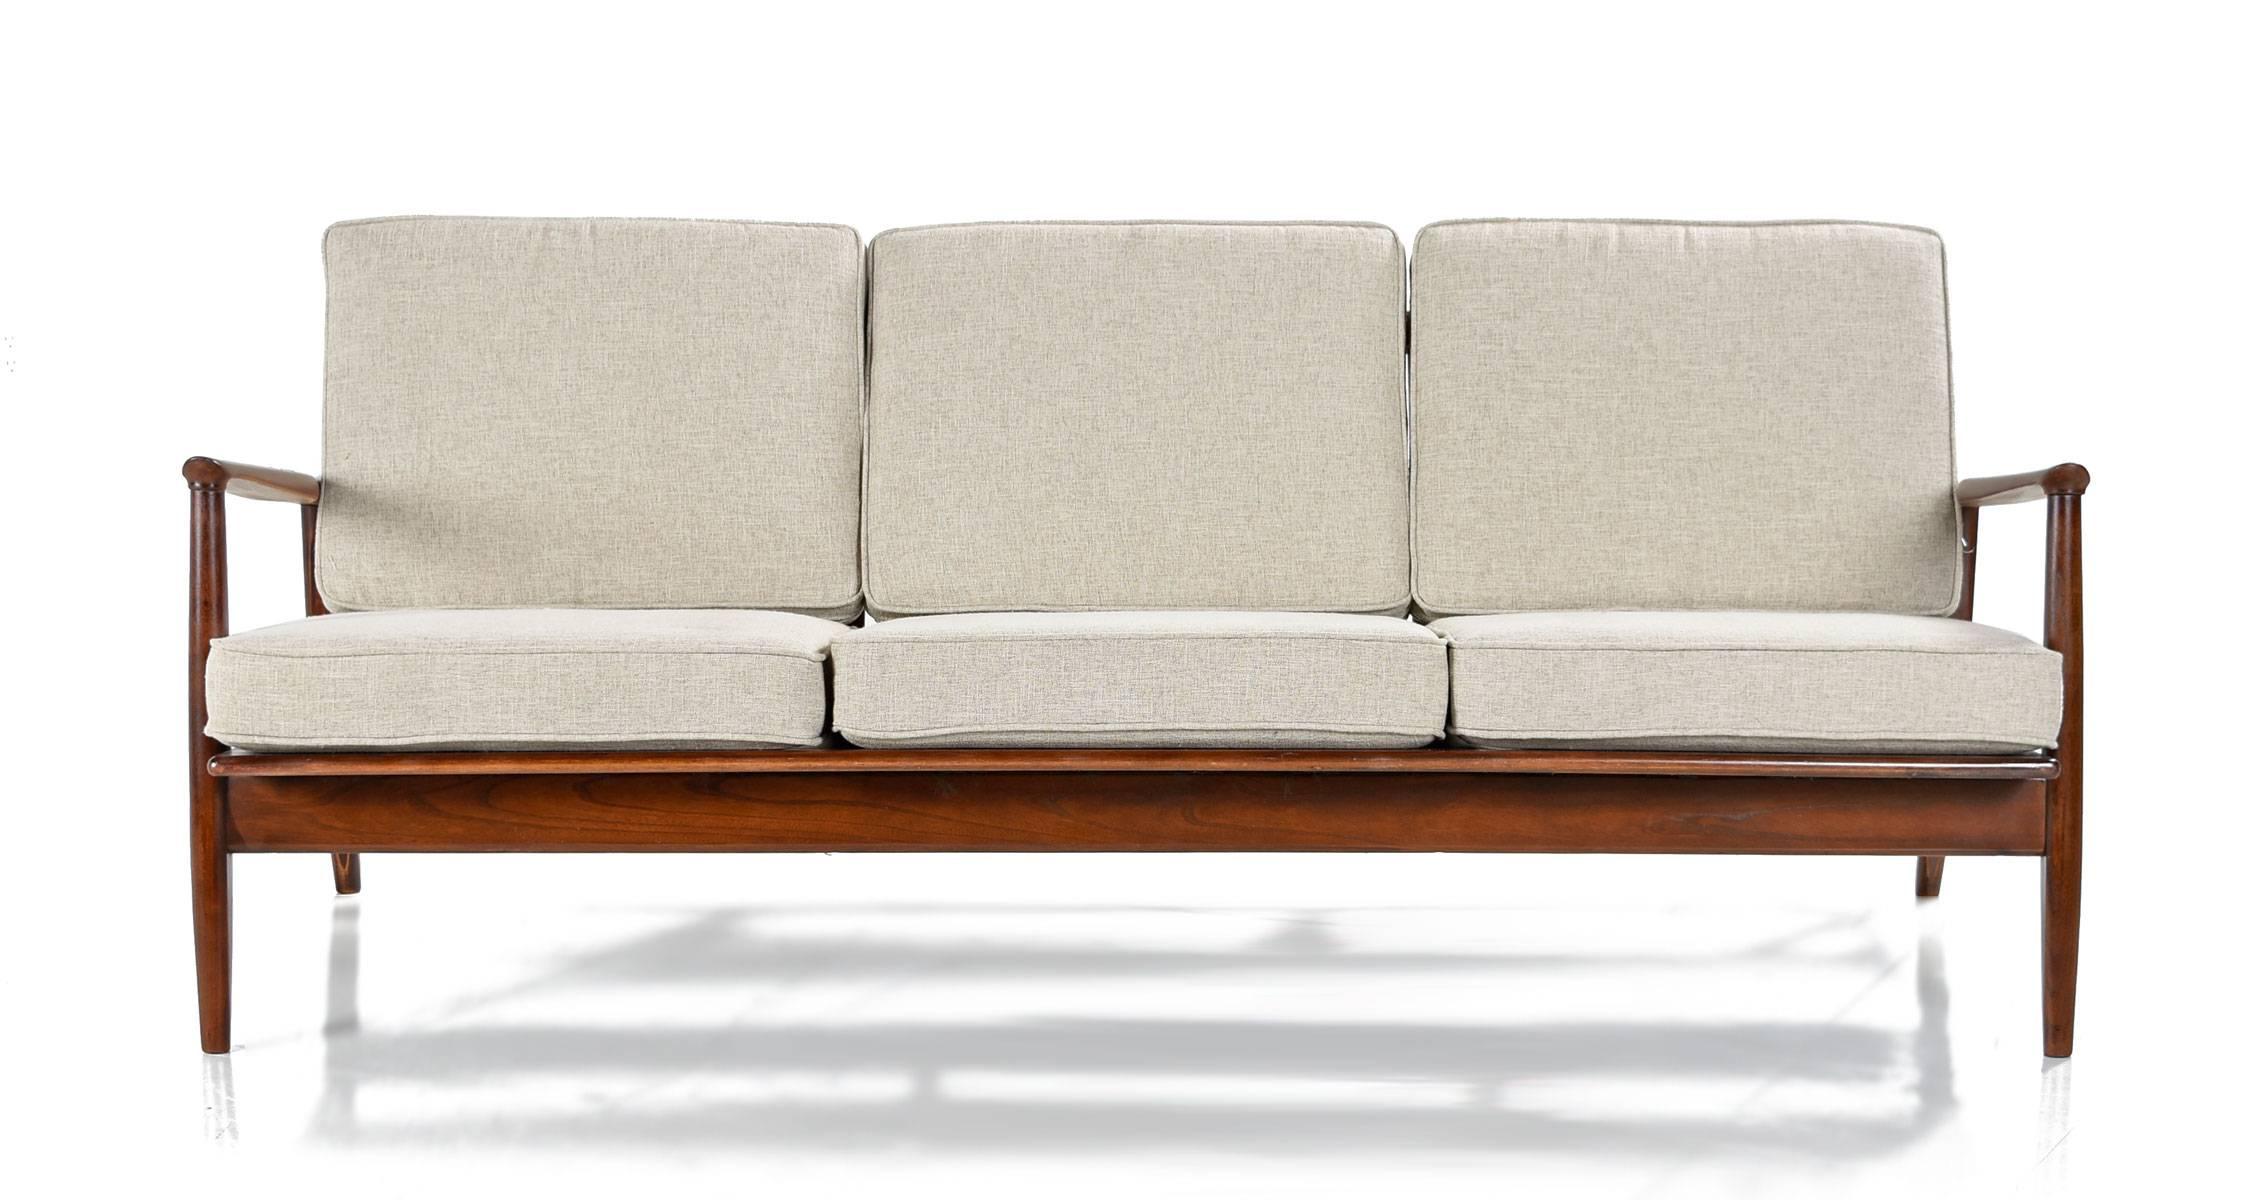 Retro Eames era sofa with Danish modern styling. Note the remarkable subtle detailing in the wood frame. Angled back legs add visual dynamism. This angle gives a gentle reclined position to the couch, enhancing comfort. The wide, sculpted arms taper